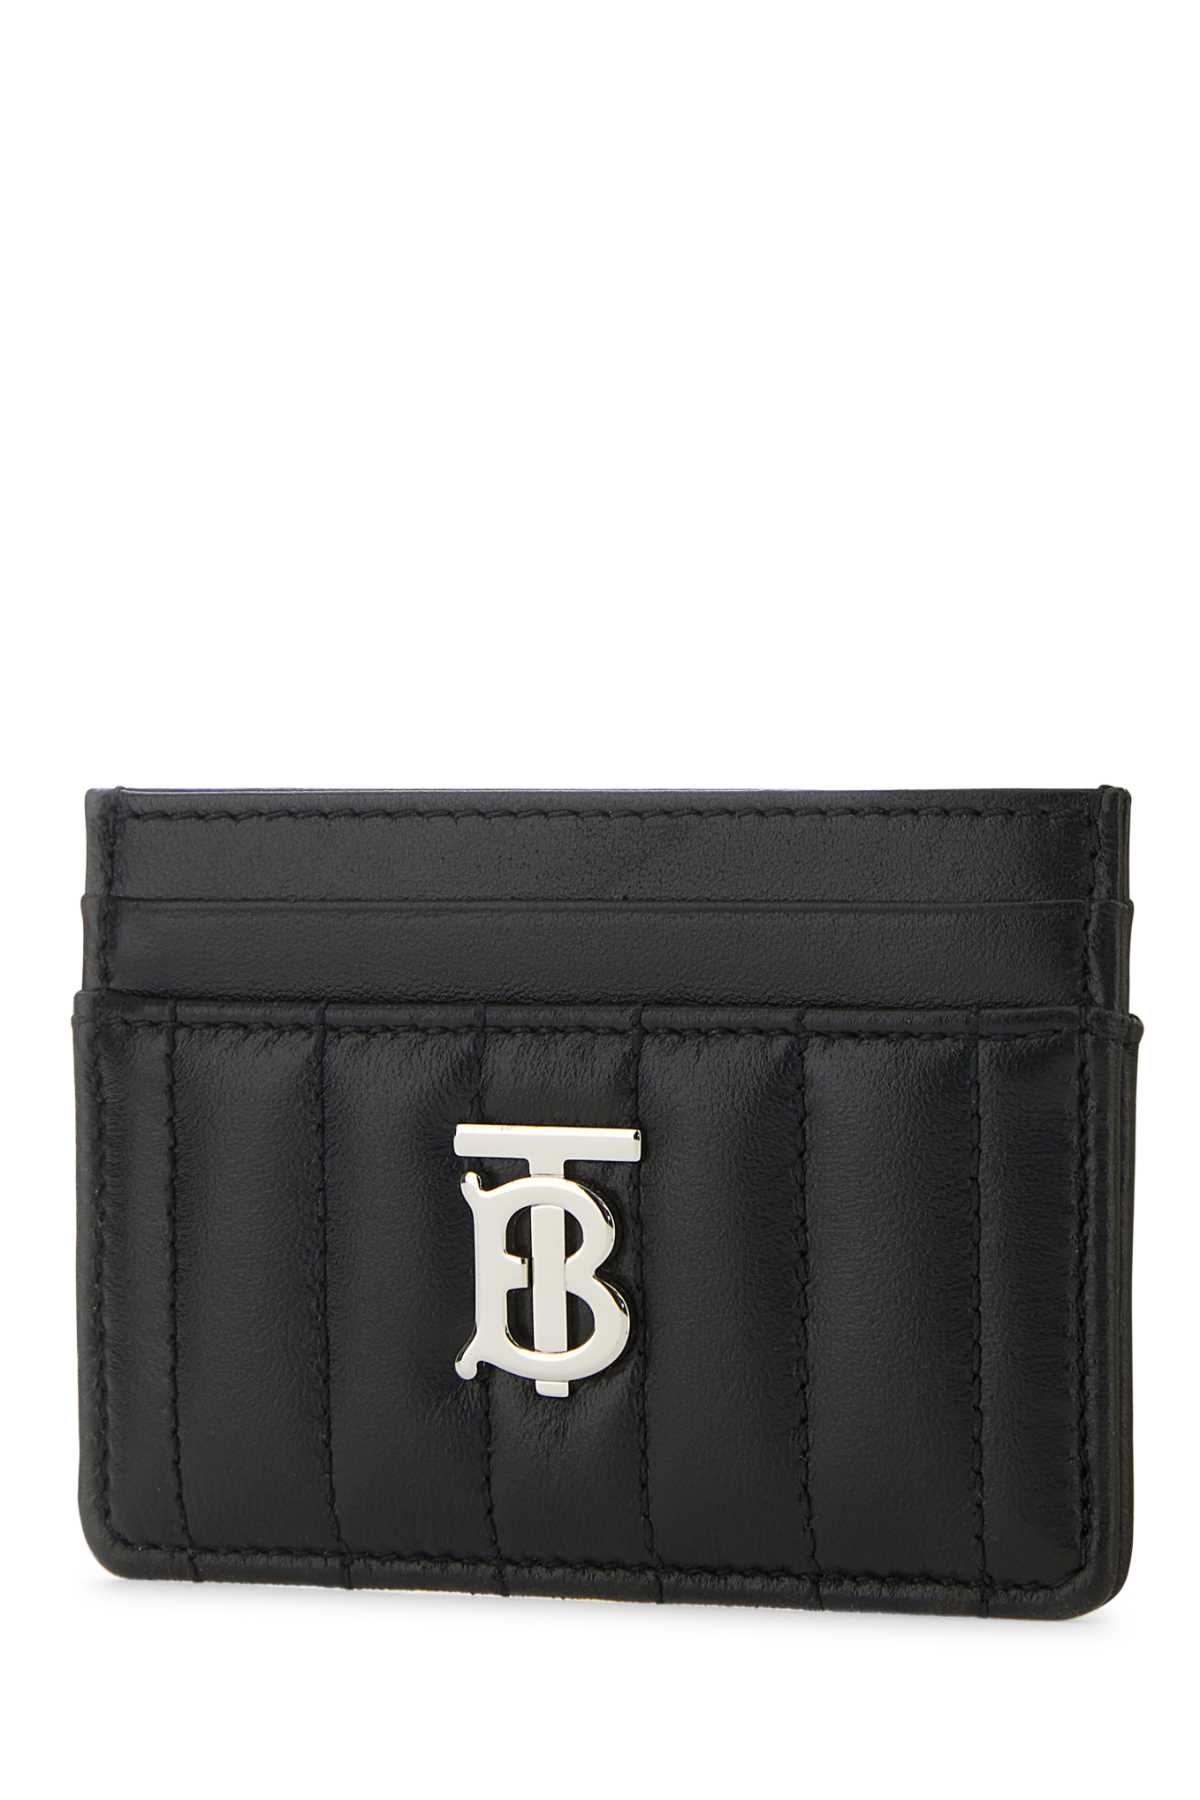 Shop Burberry Black Leather Lola Card Holder In Blackpalladio